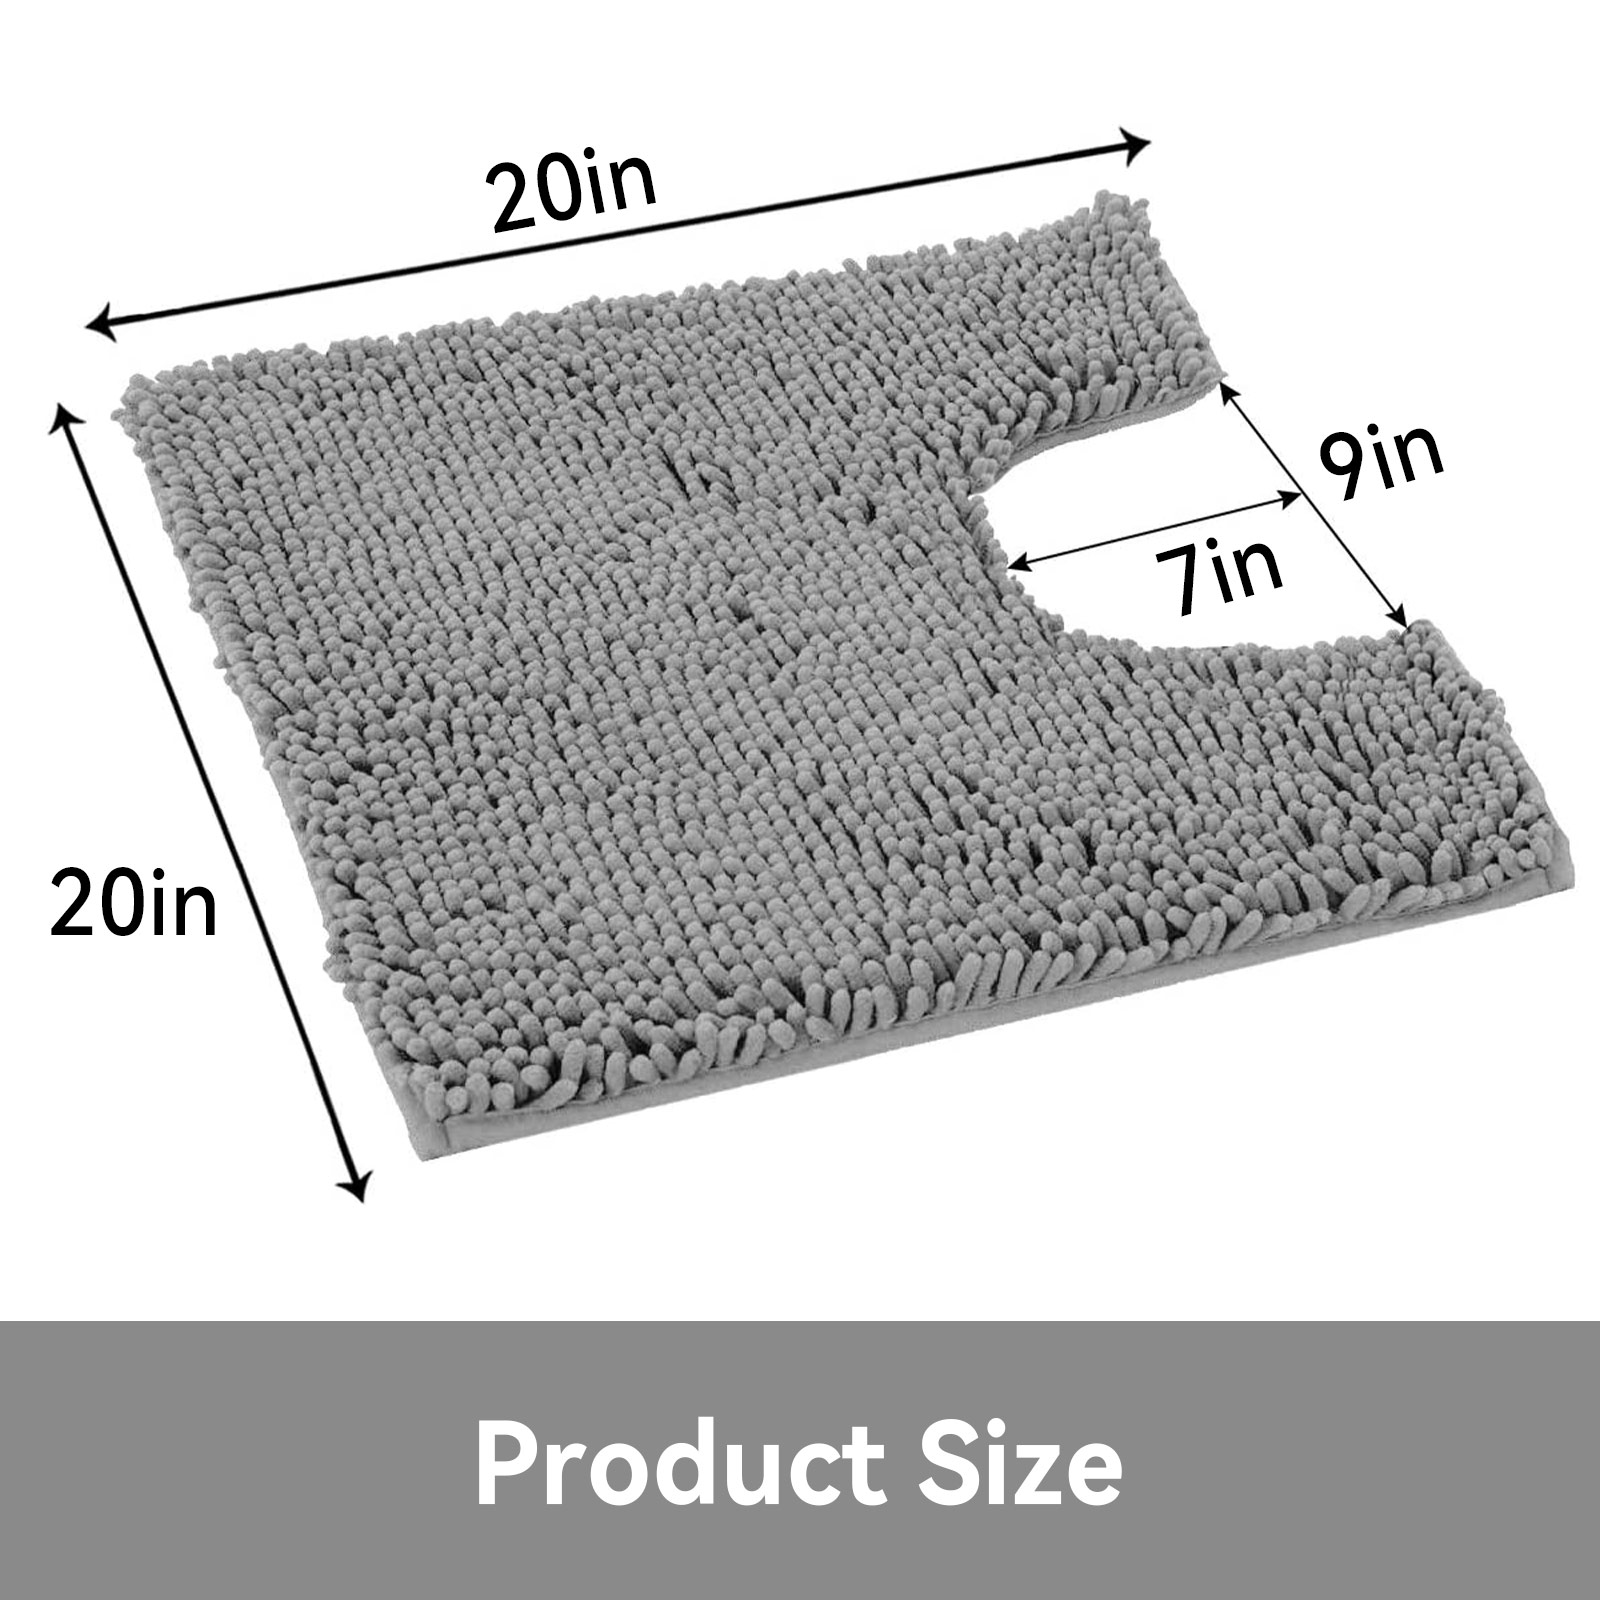 Tripumer Bath Rugs U-Shaped Toilet Mats Ultra Soft Non Slip and Absorbent Chenille Contour Bath Rug 20x20 inch Bathroom Rugs Light Gray Plush Bath Mats Machine Wash and Dry - image 2 of 6